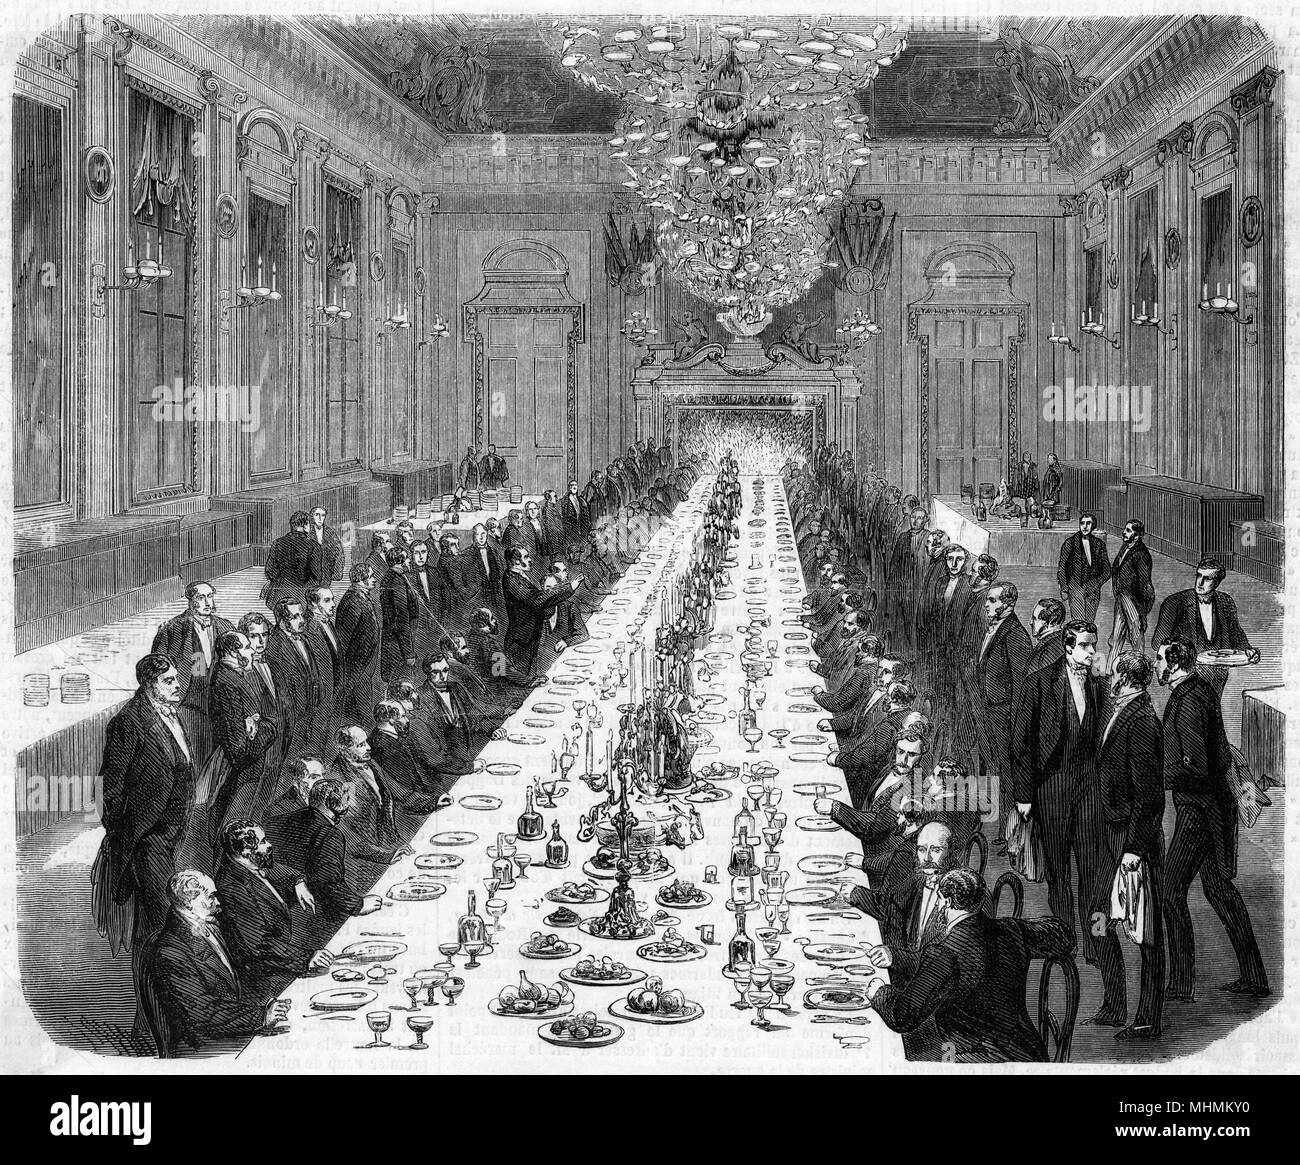 Every guest at this formal banquet has his own servant to attend to him.       Date: 1861 Stock Photo